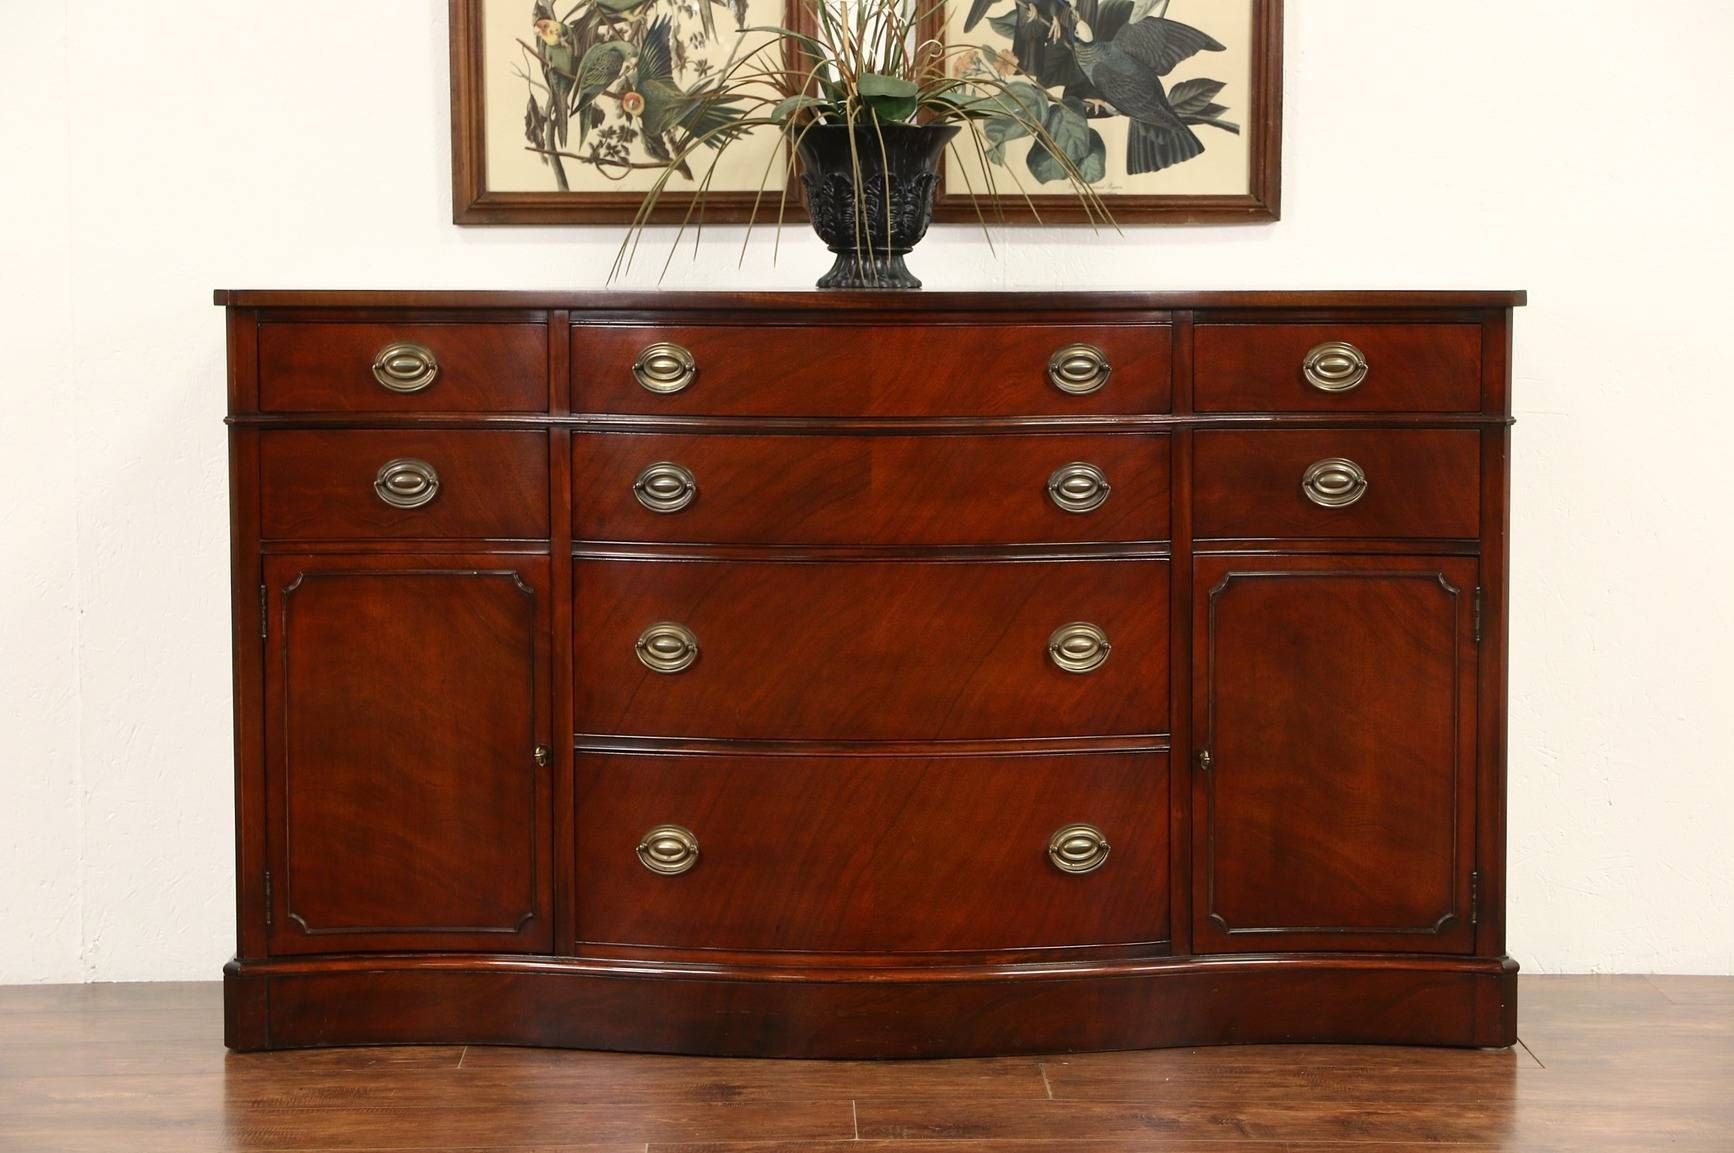 Sold – Drexel Travis Court Mahogany Sideboard, Buffet Or Server Regarding Recent Mahogany Sideboards Buffets (View 6 of 15)